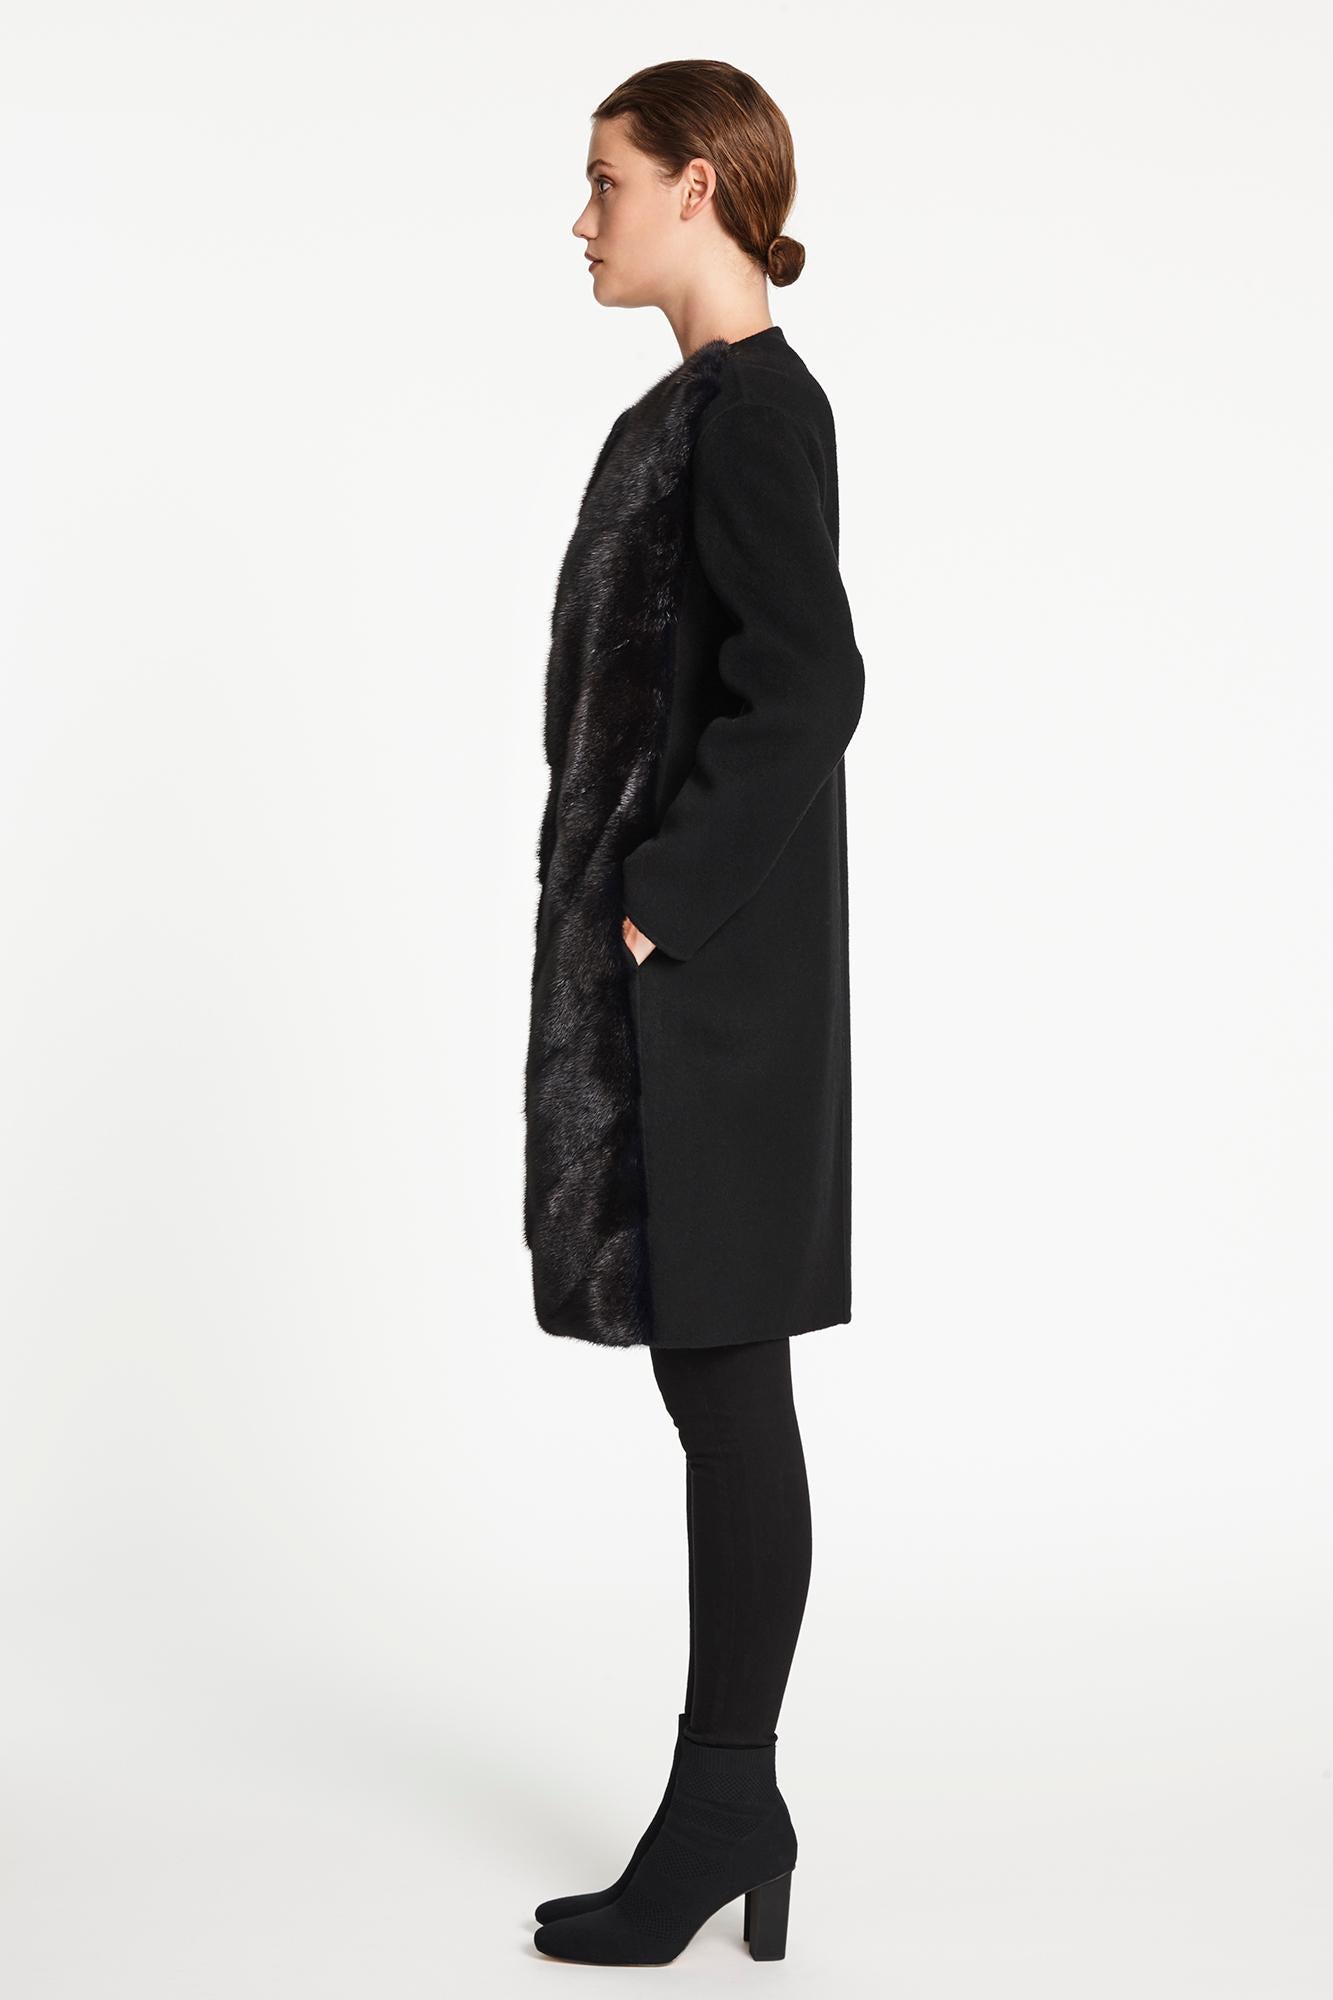 Collarless Coat Cashmere and in Navy Black Mink Fur 4